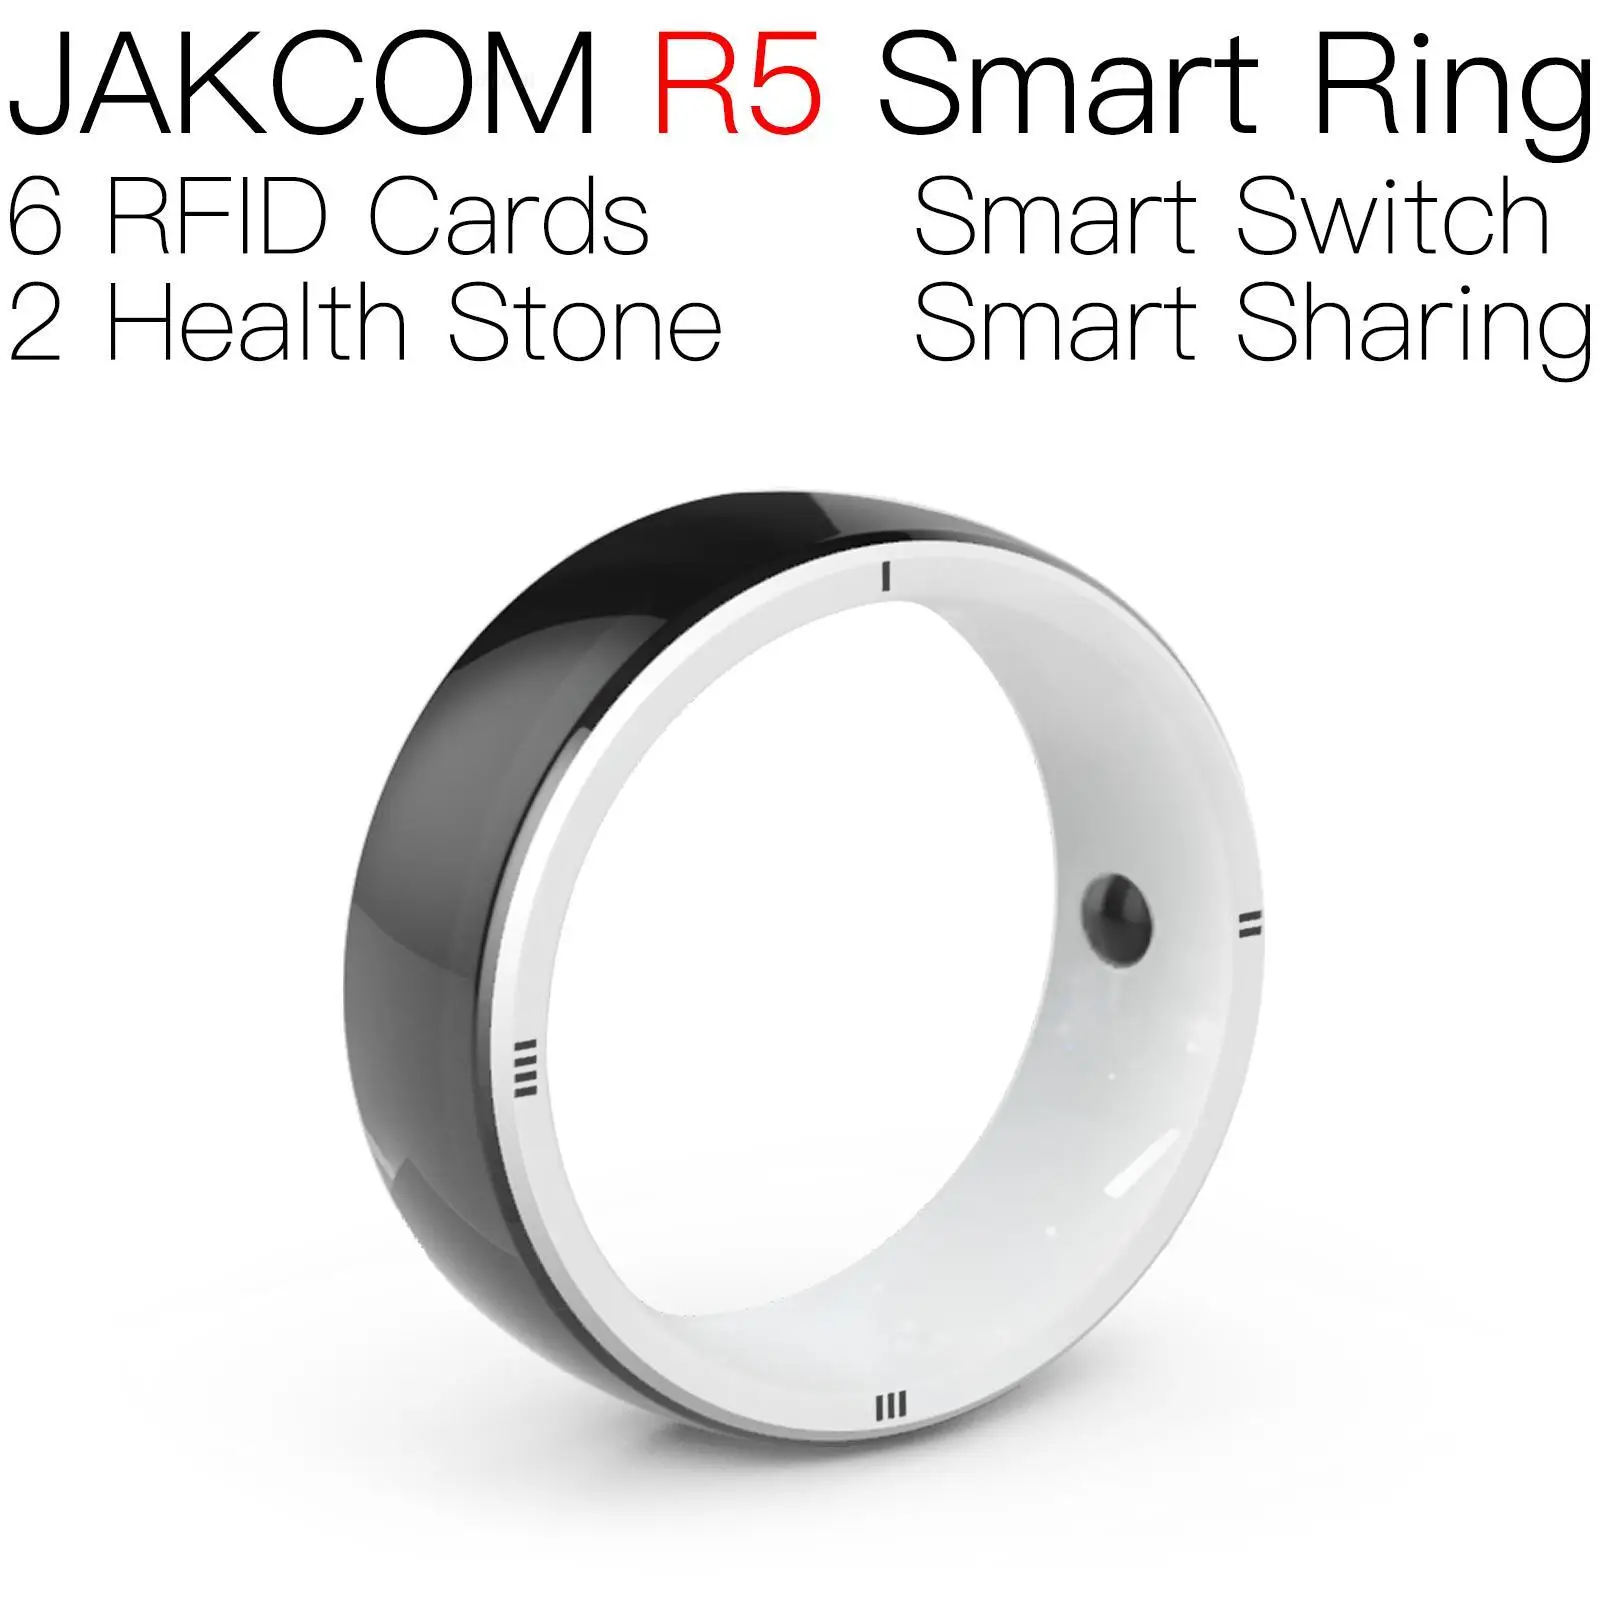 

JAKCOM R5 Smart Ring Newer than ic card magnetic nfc jay home official store rfid rewritable uid changeable uhf tags tag pour